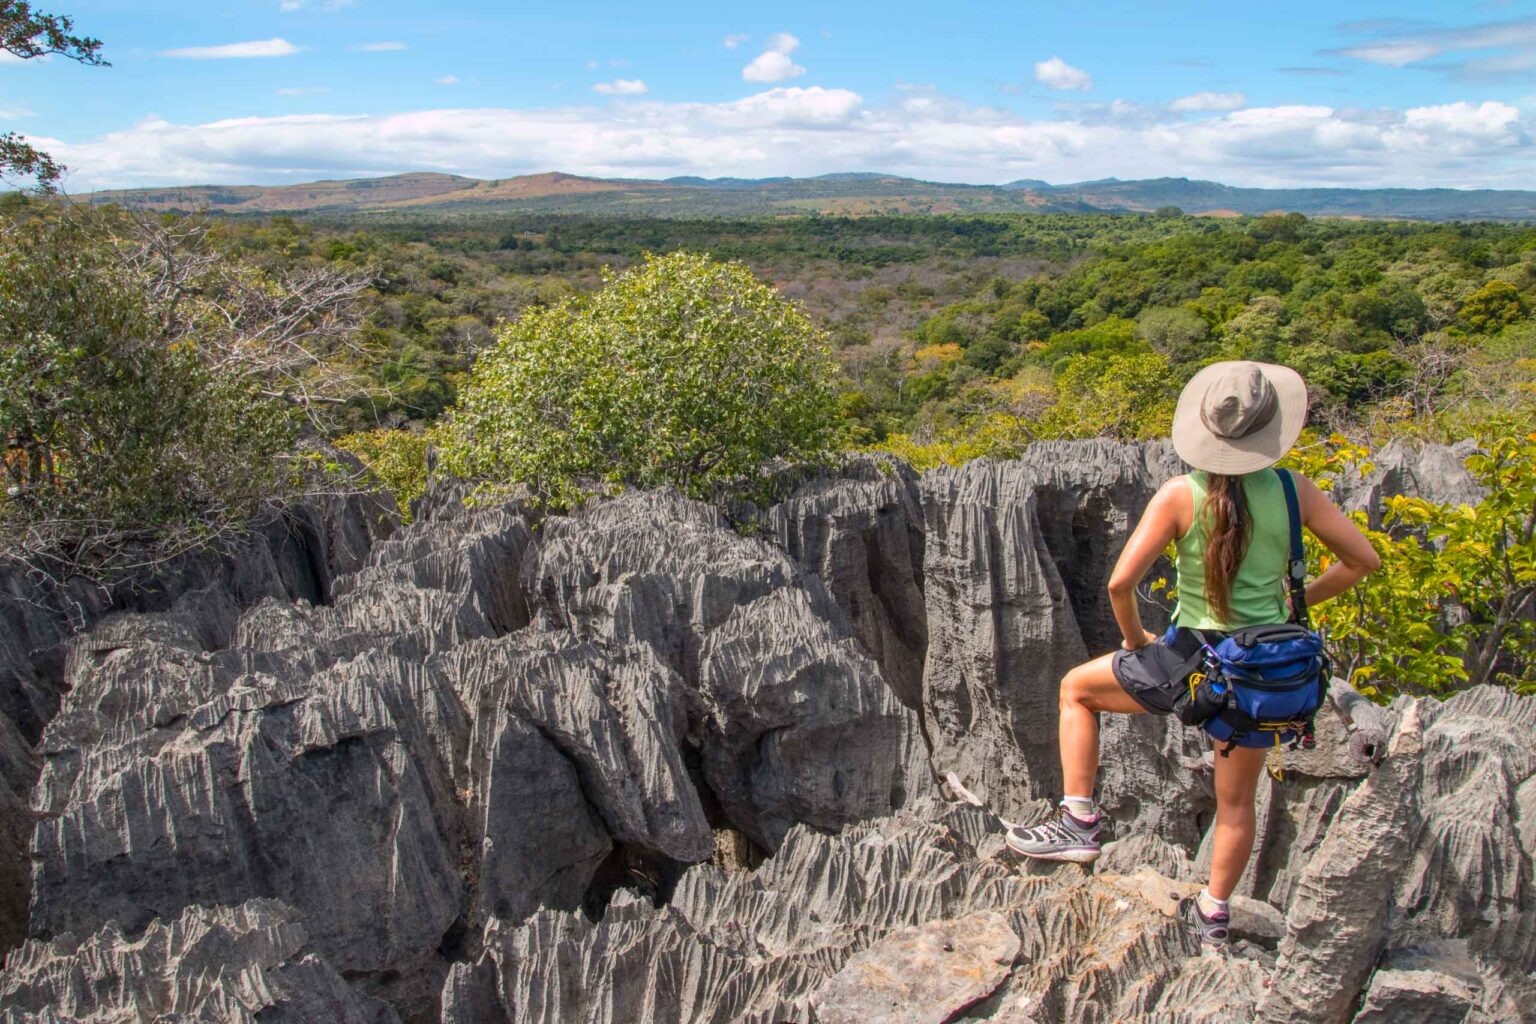 Hiker looks out over Madagascar’s tsingy limestone pinnacle rock formations.